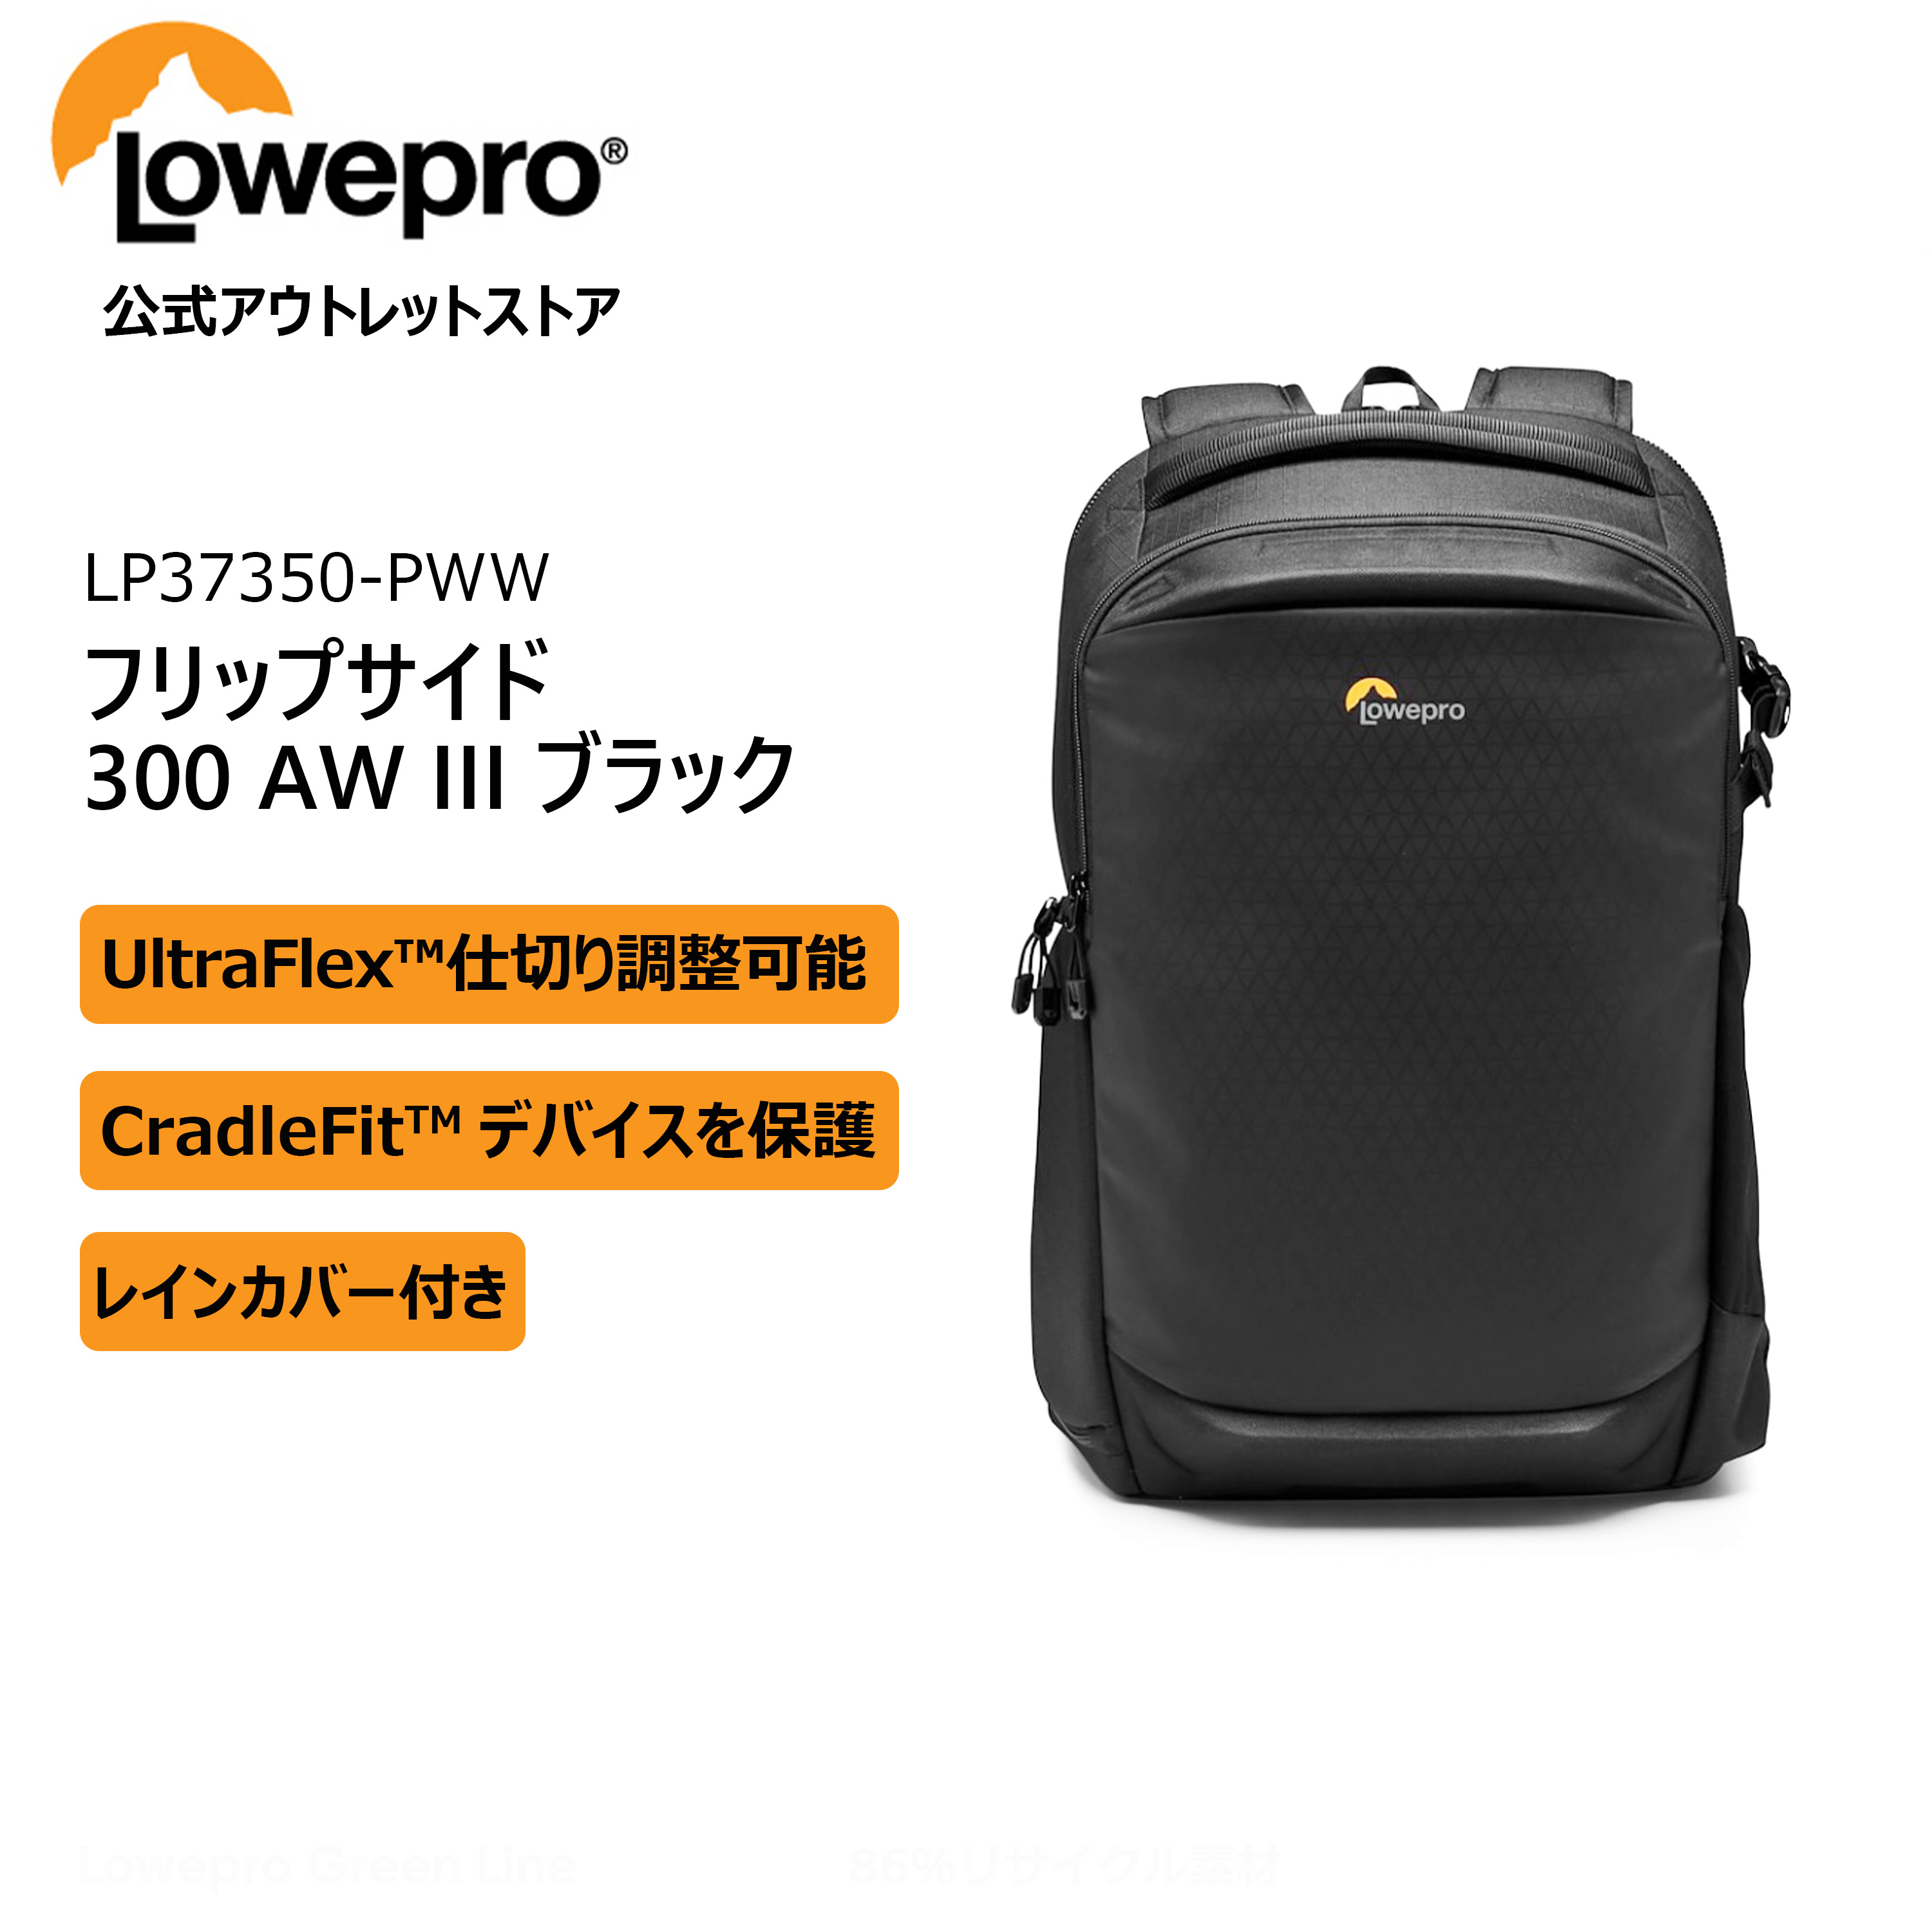 [ outlet ] backpack f lip side 300 AW III black LP37350-PWW [Lowepro rope ro official ]